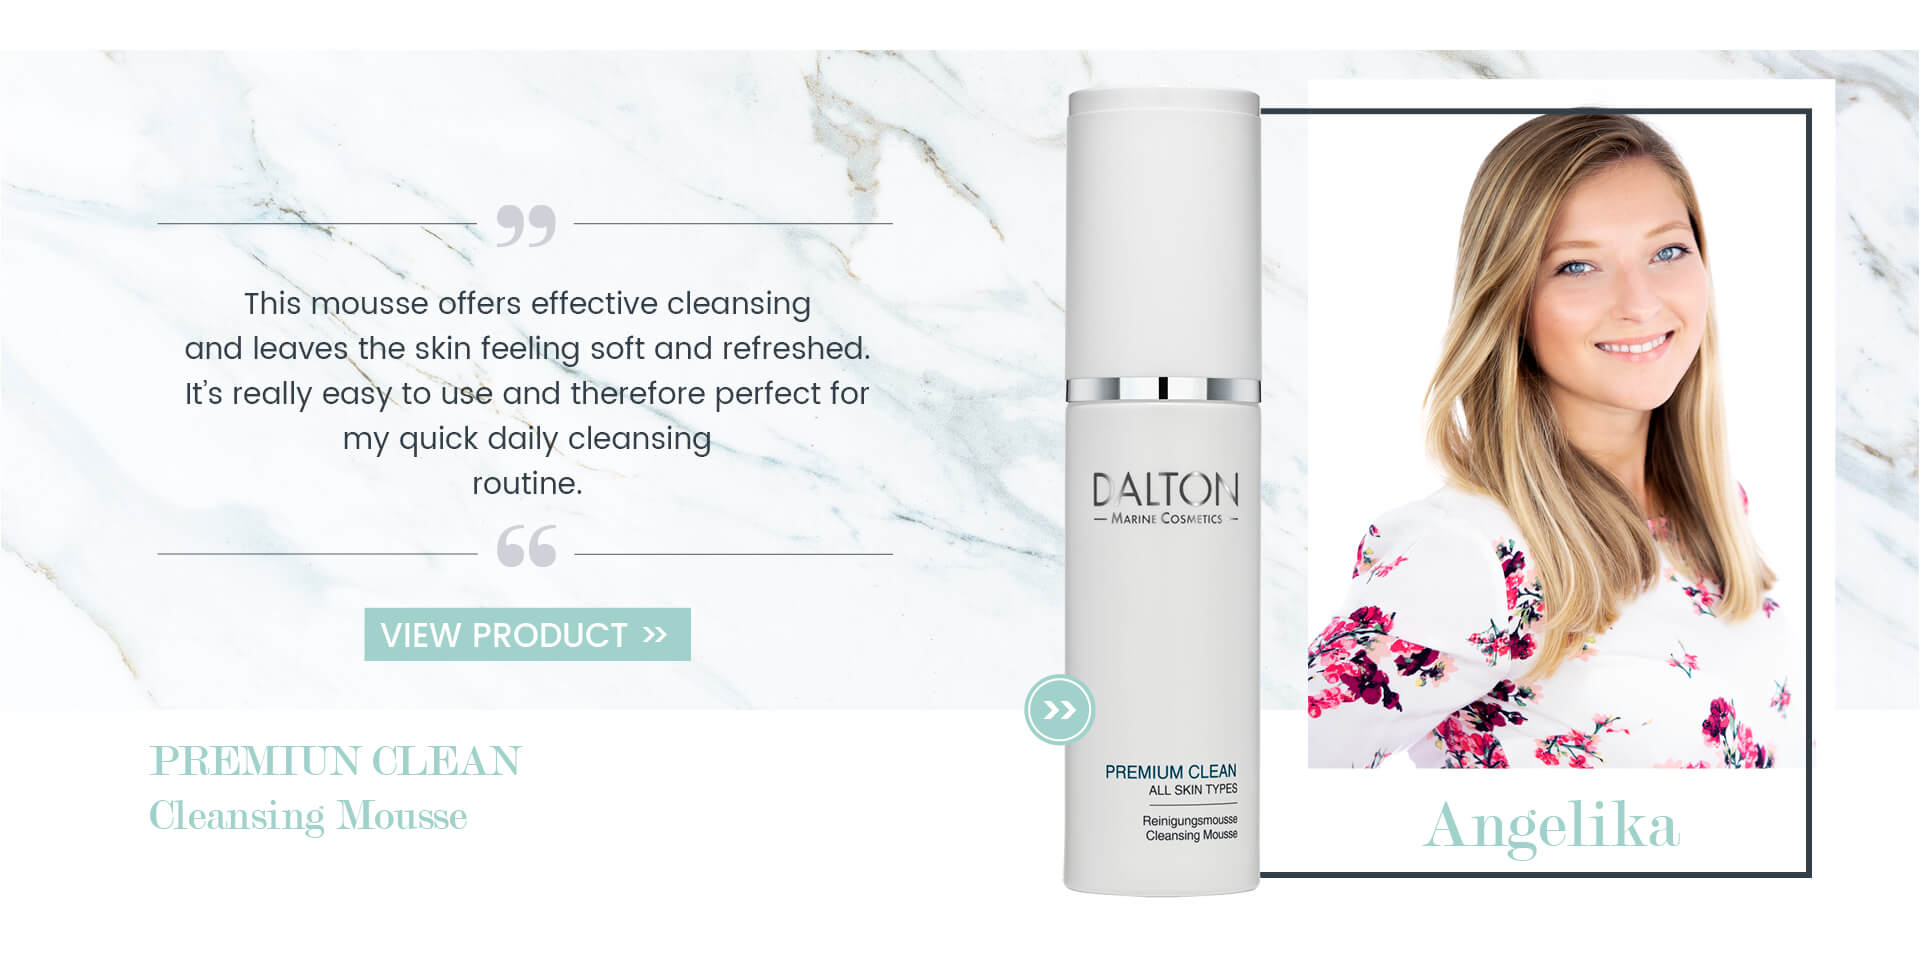 Premium Cleansing Mousse with sea foam